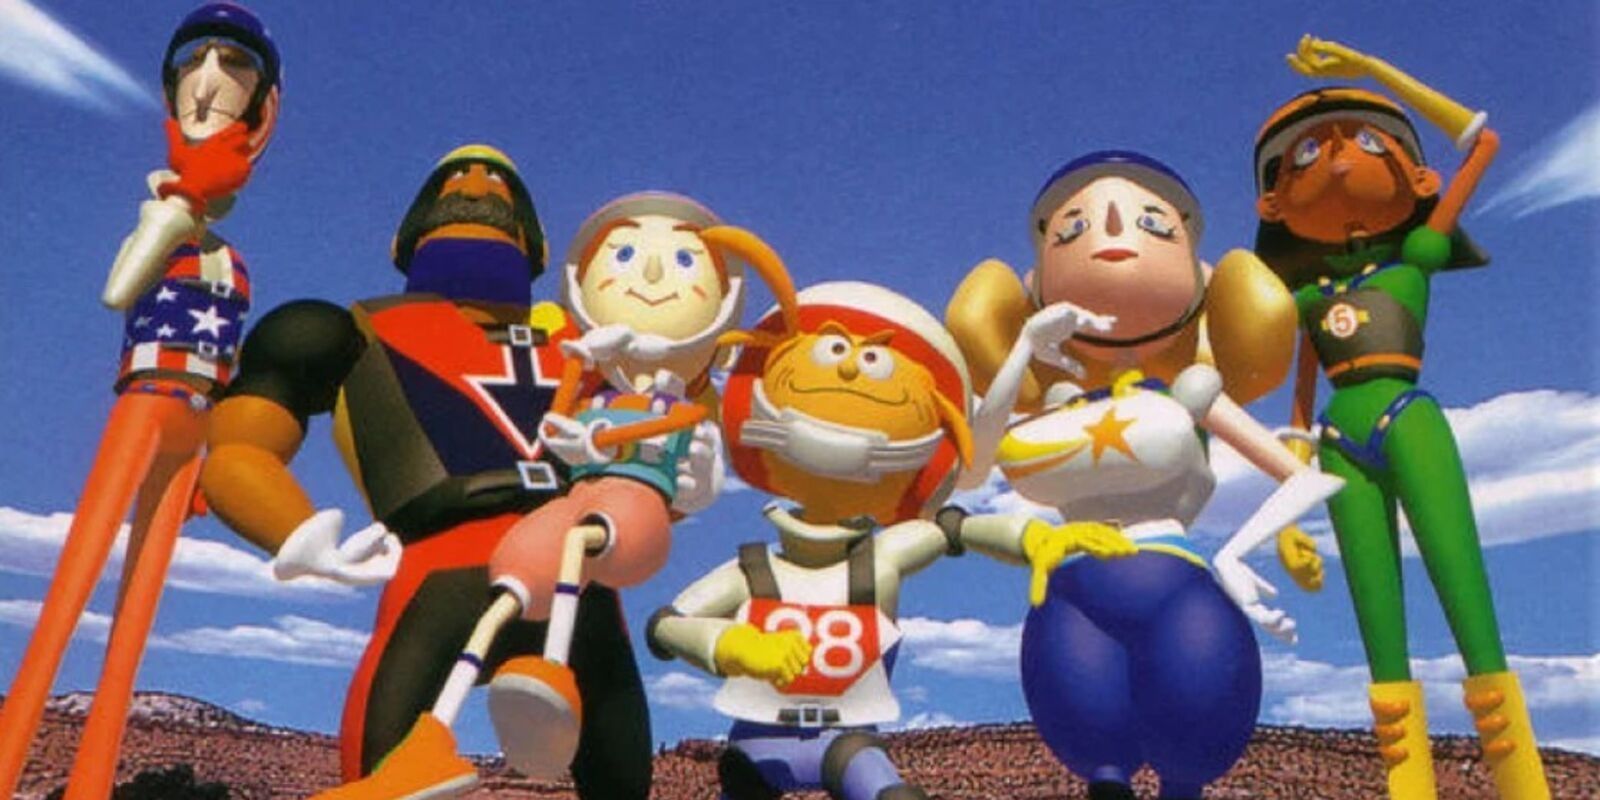 The cast of characters as seen on the Japanese cover art of Pilotwings 64